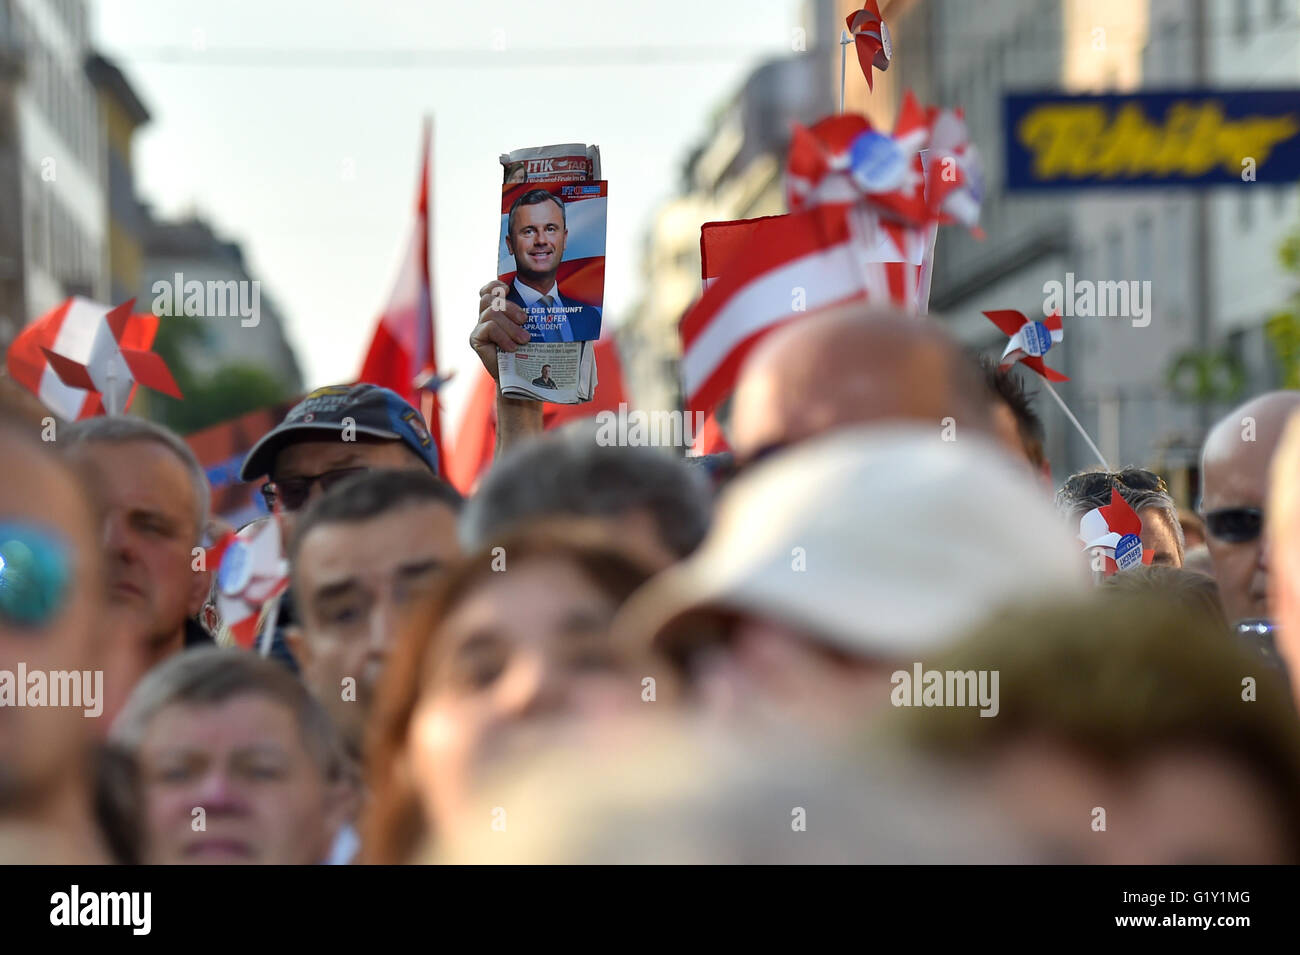 Vienna, Austria. 20th May, 2016. Supporters of Norbert Hofer, candidate for presidential elections of Austria's Freedom Party, participate in the final election campaign event in Vienna, Austria, May 20, 2016. Credit:  Qian Yi/Xinhua/Alamy Live News Stock Photo